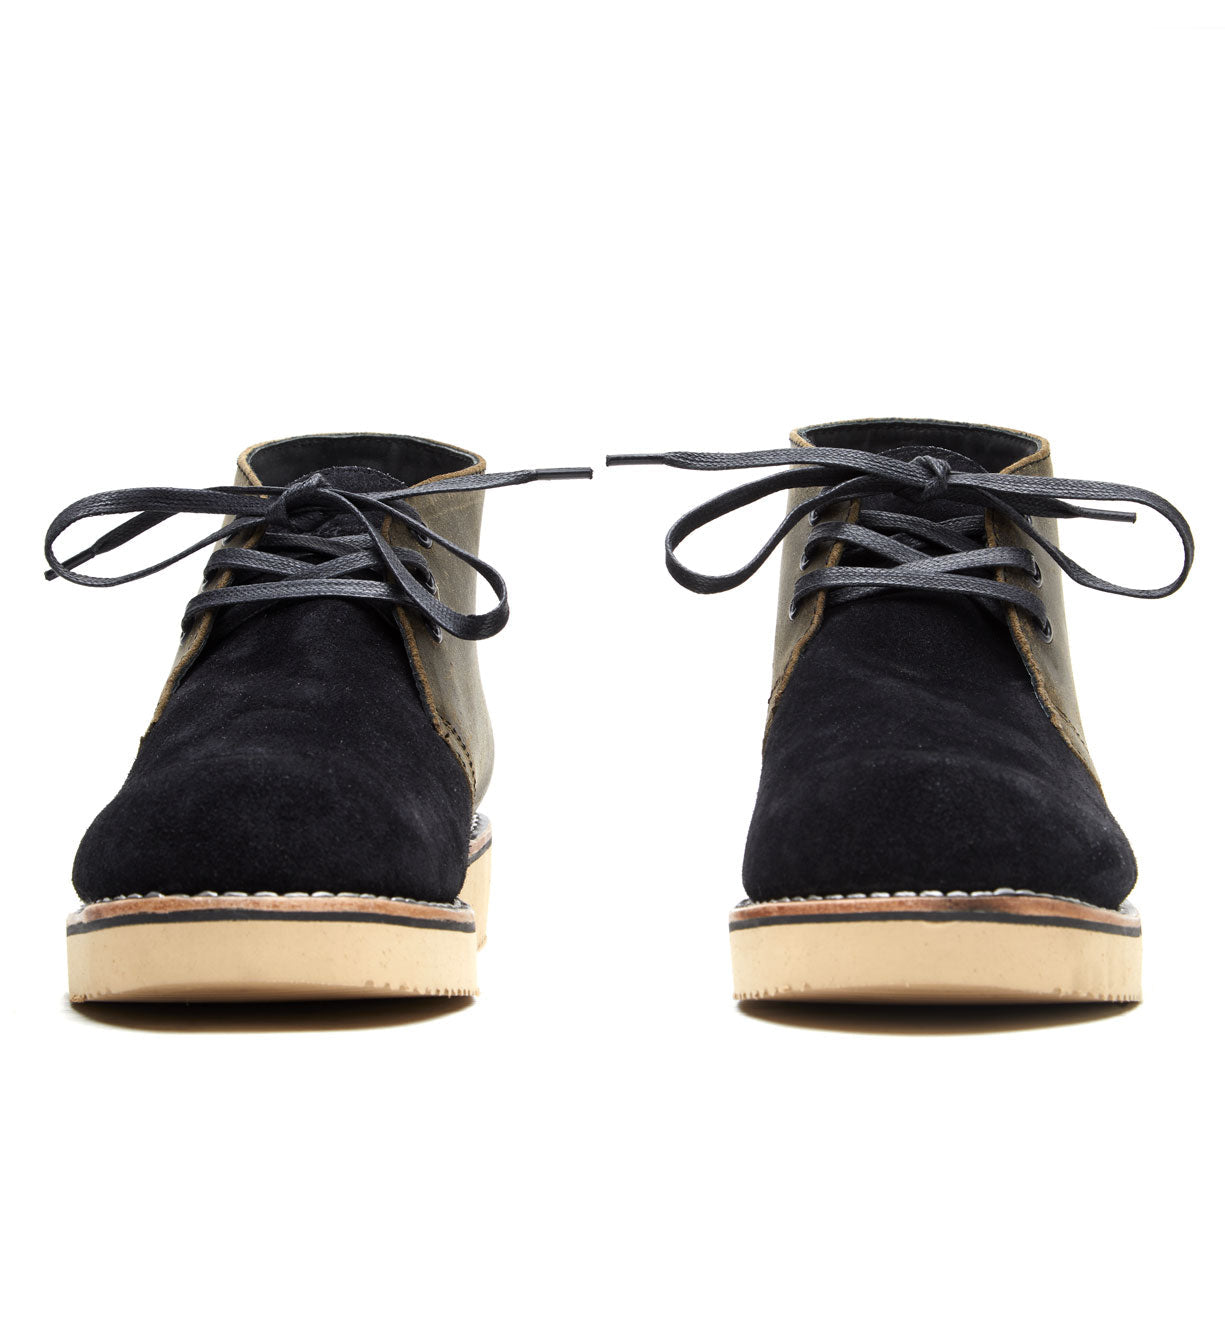 A pair of black sued boots from the Santa Rosa Brand collection with tan laces, called Union Boot.